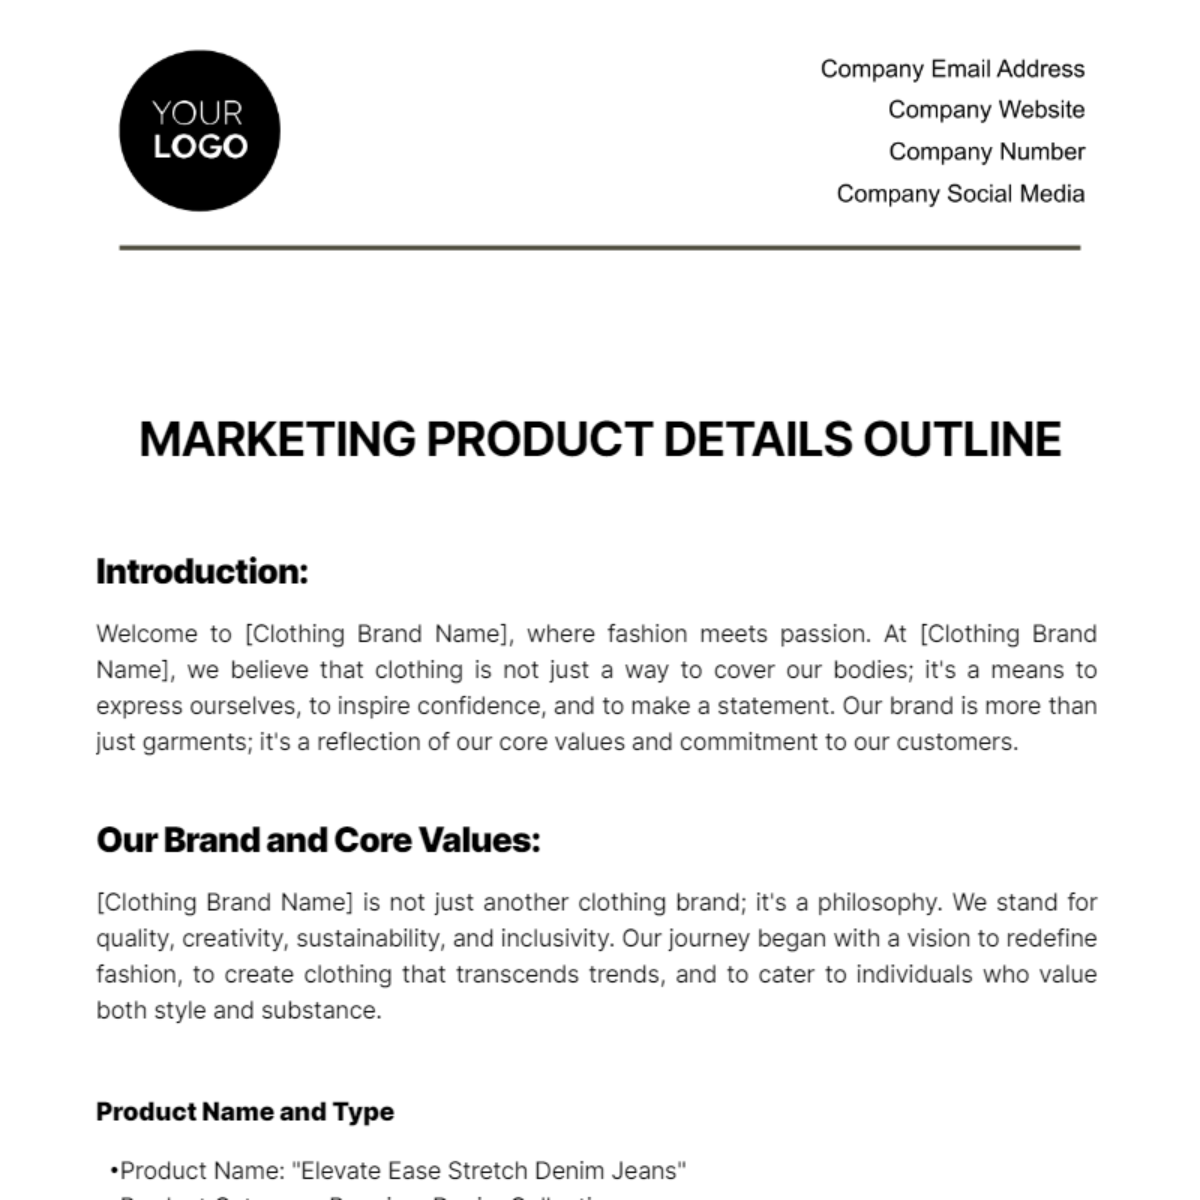 Marketing Product Details Outline Template